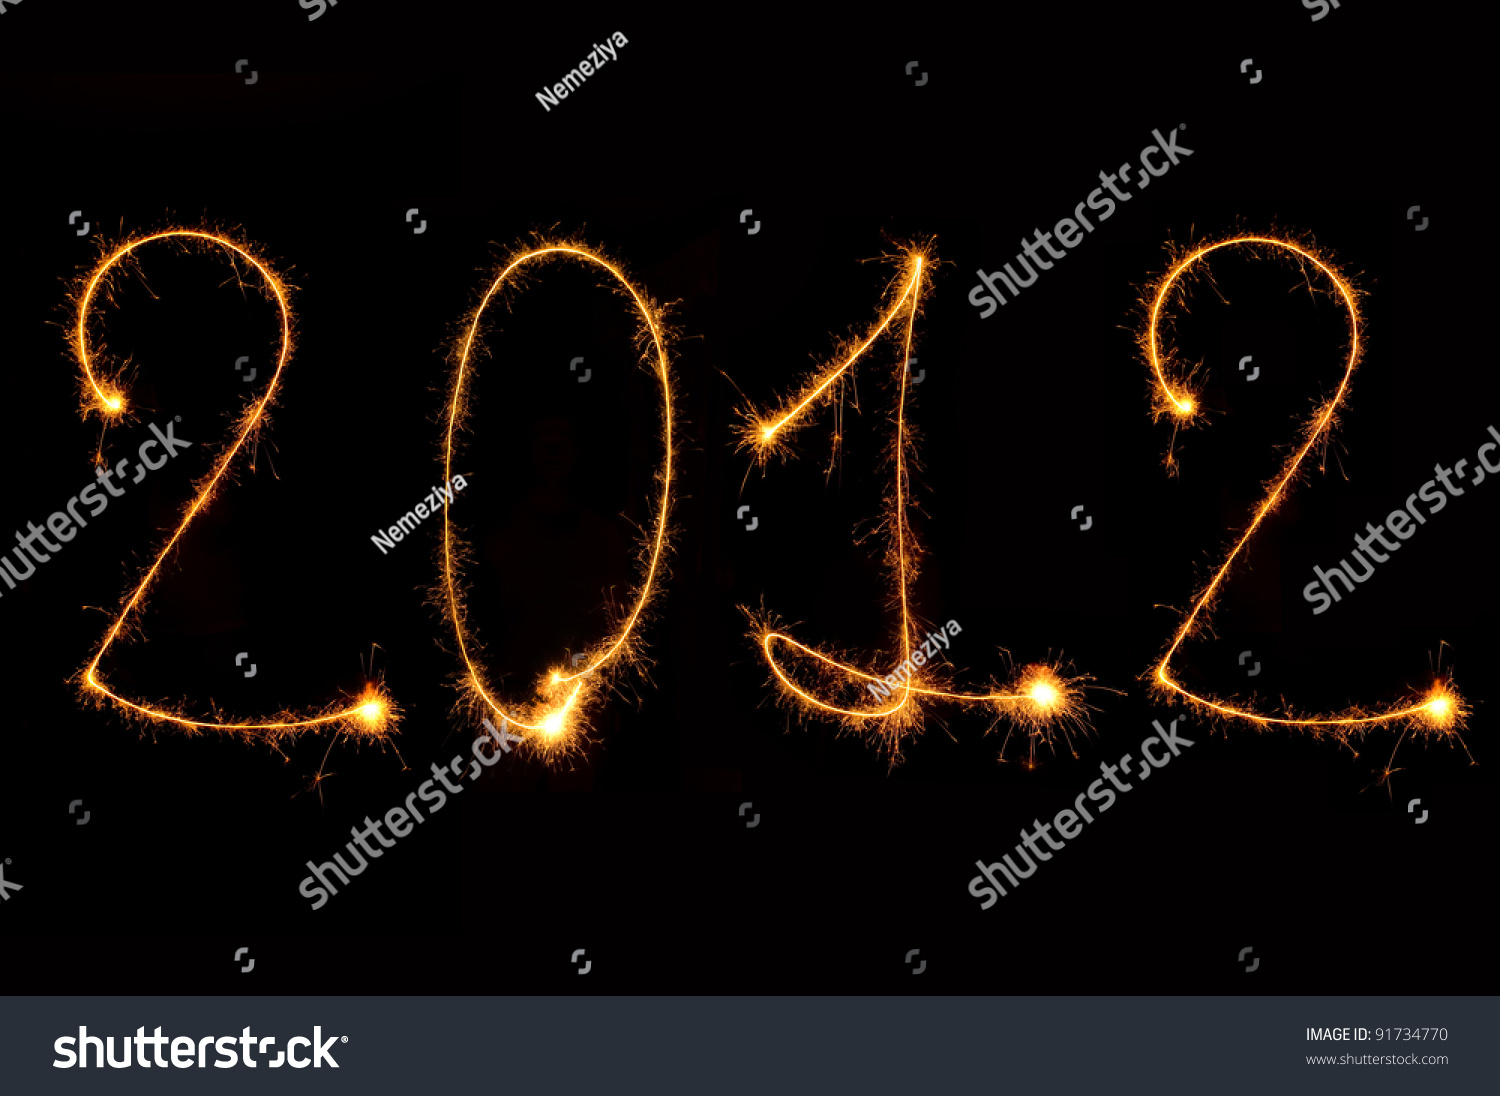 New Year Stylish Sparkle Color Design Stock Photo 91734770 : Shutterstock